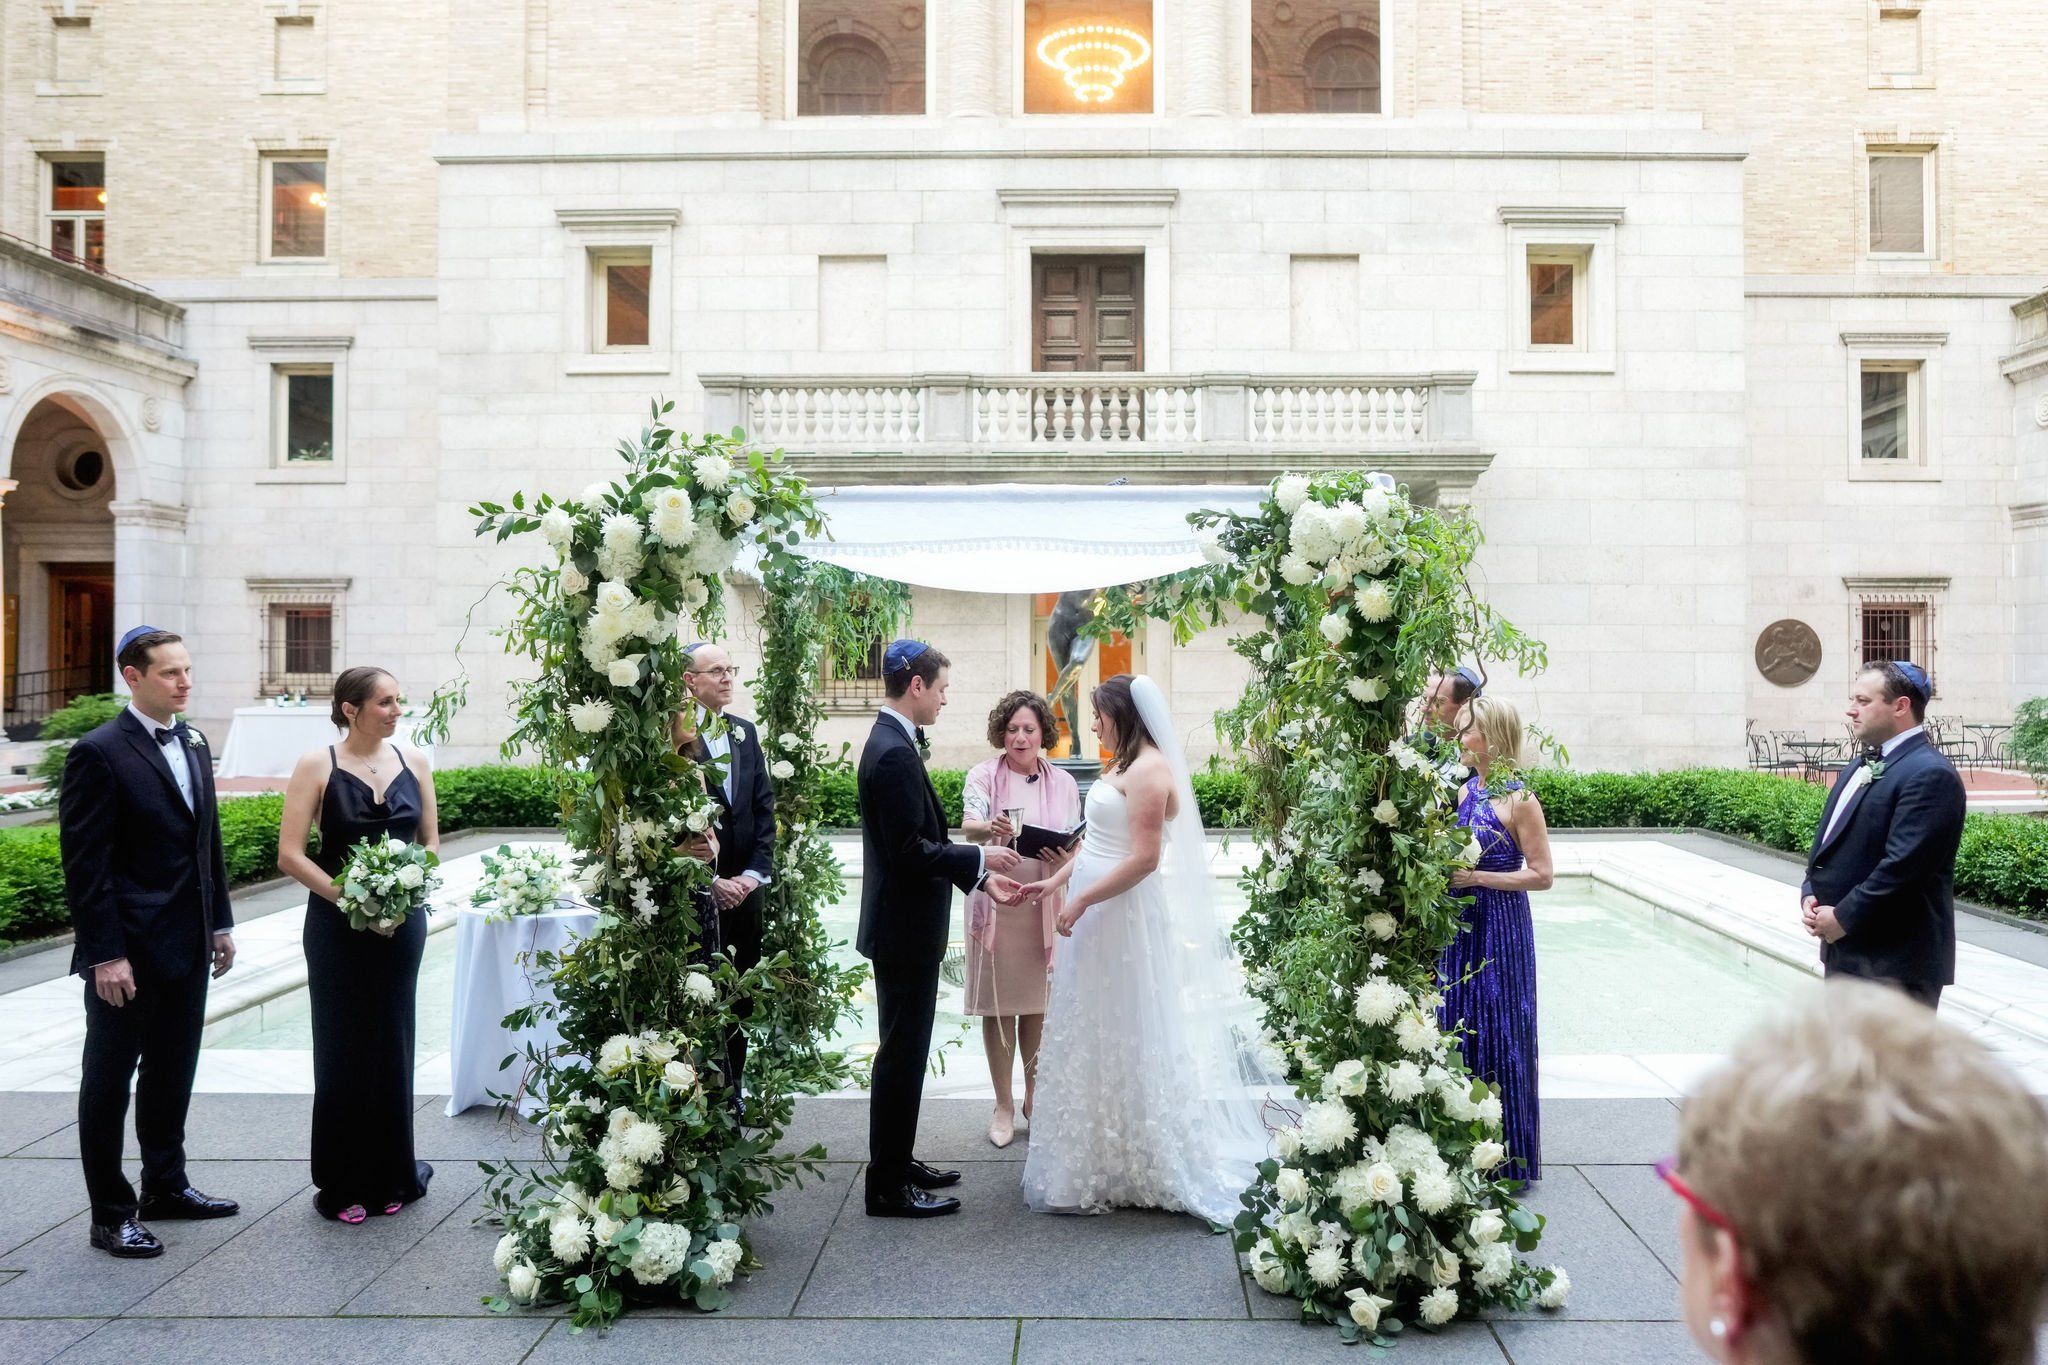 Whimsical Courtyard Wedding at the BPL